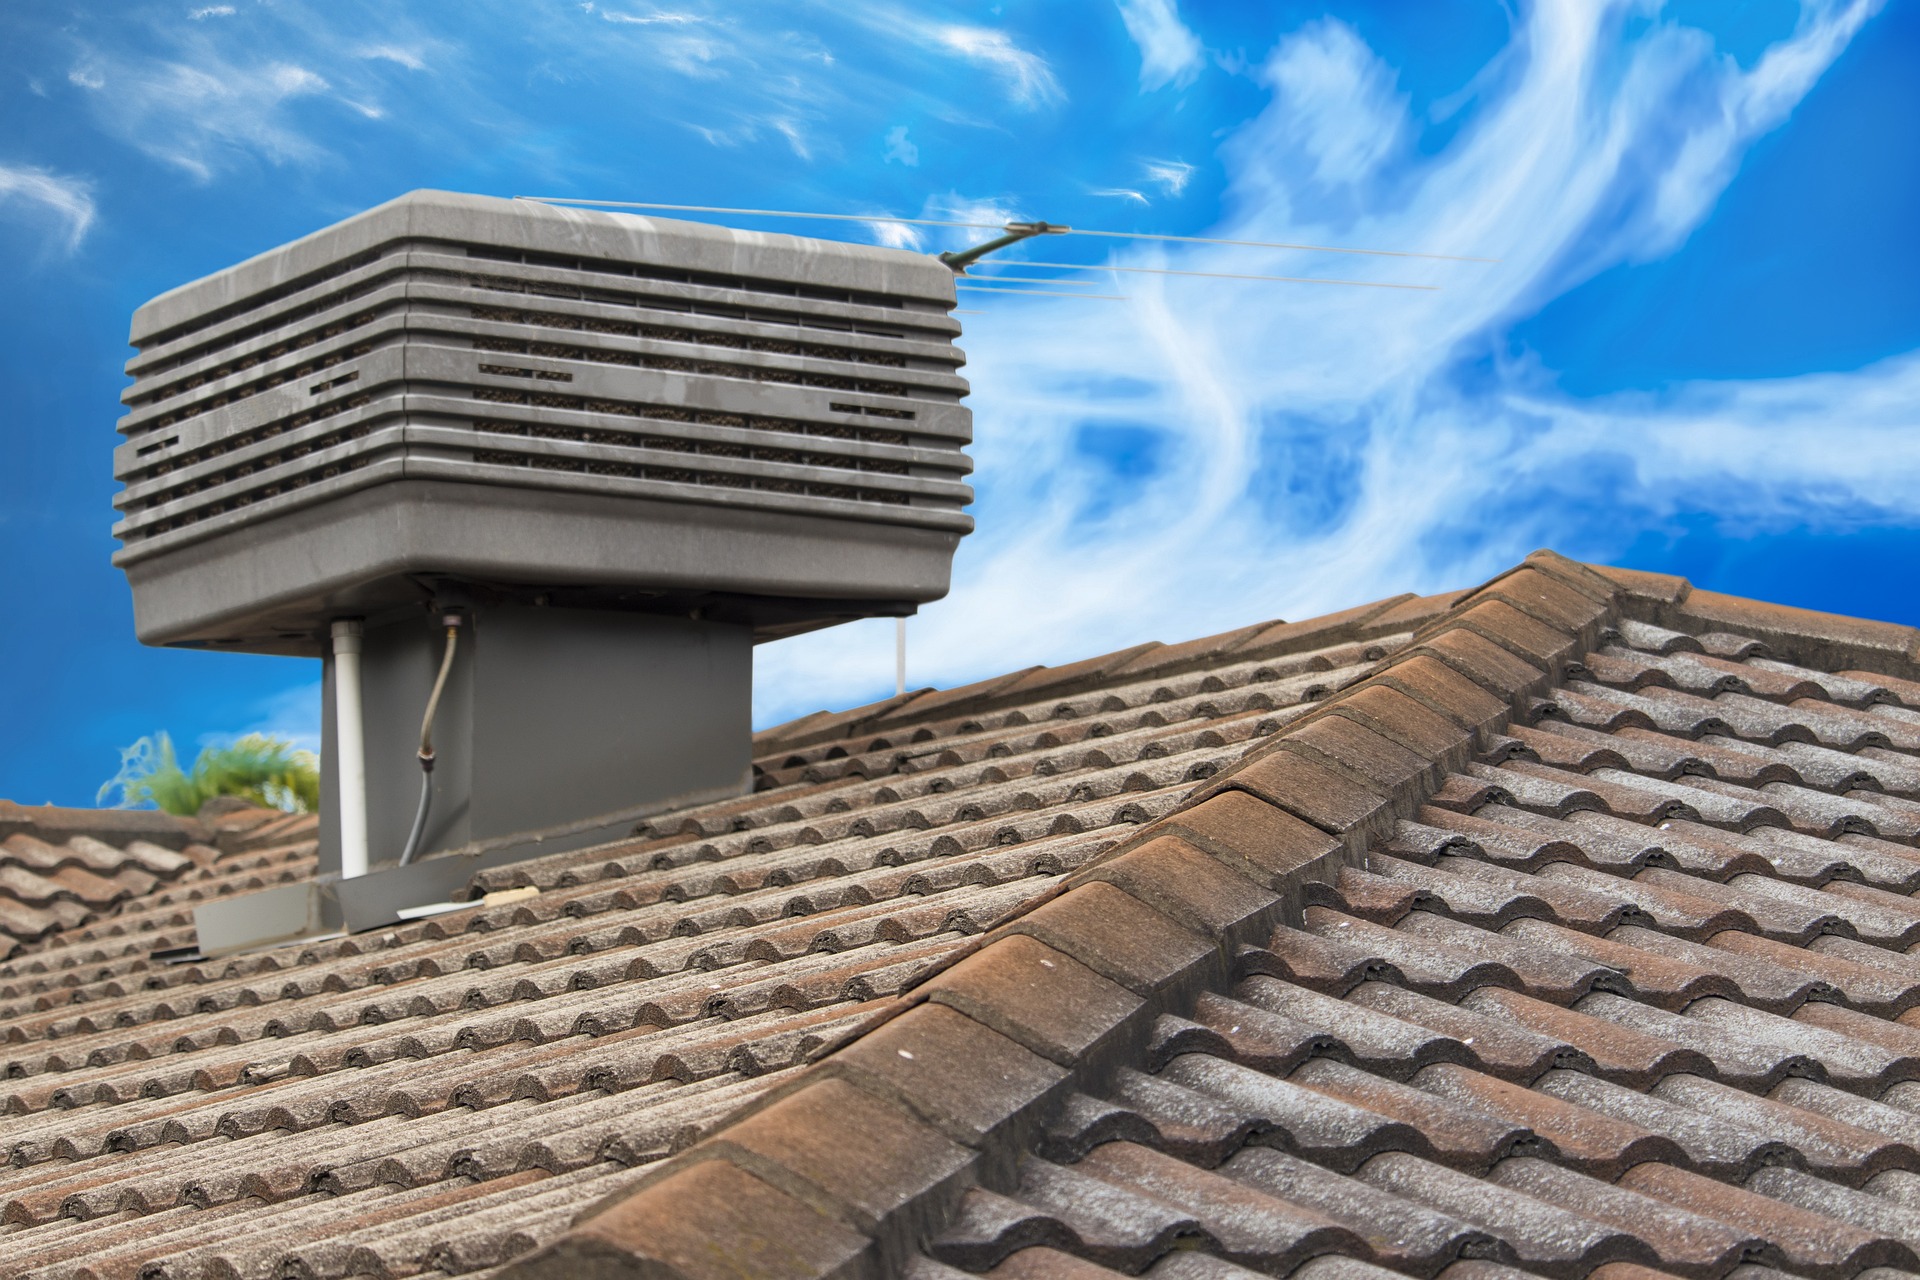 H&J Roofing | Safeguarding Your Shelter: How Proper Roof Maintenance Protects Your Investment